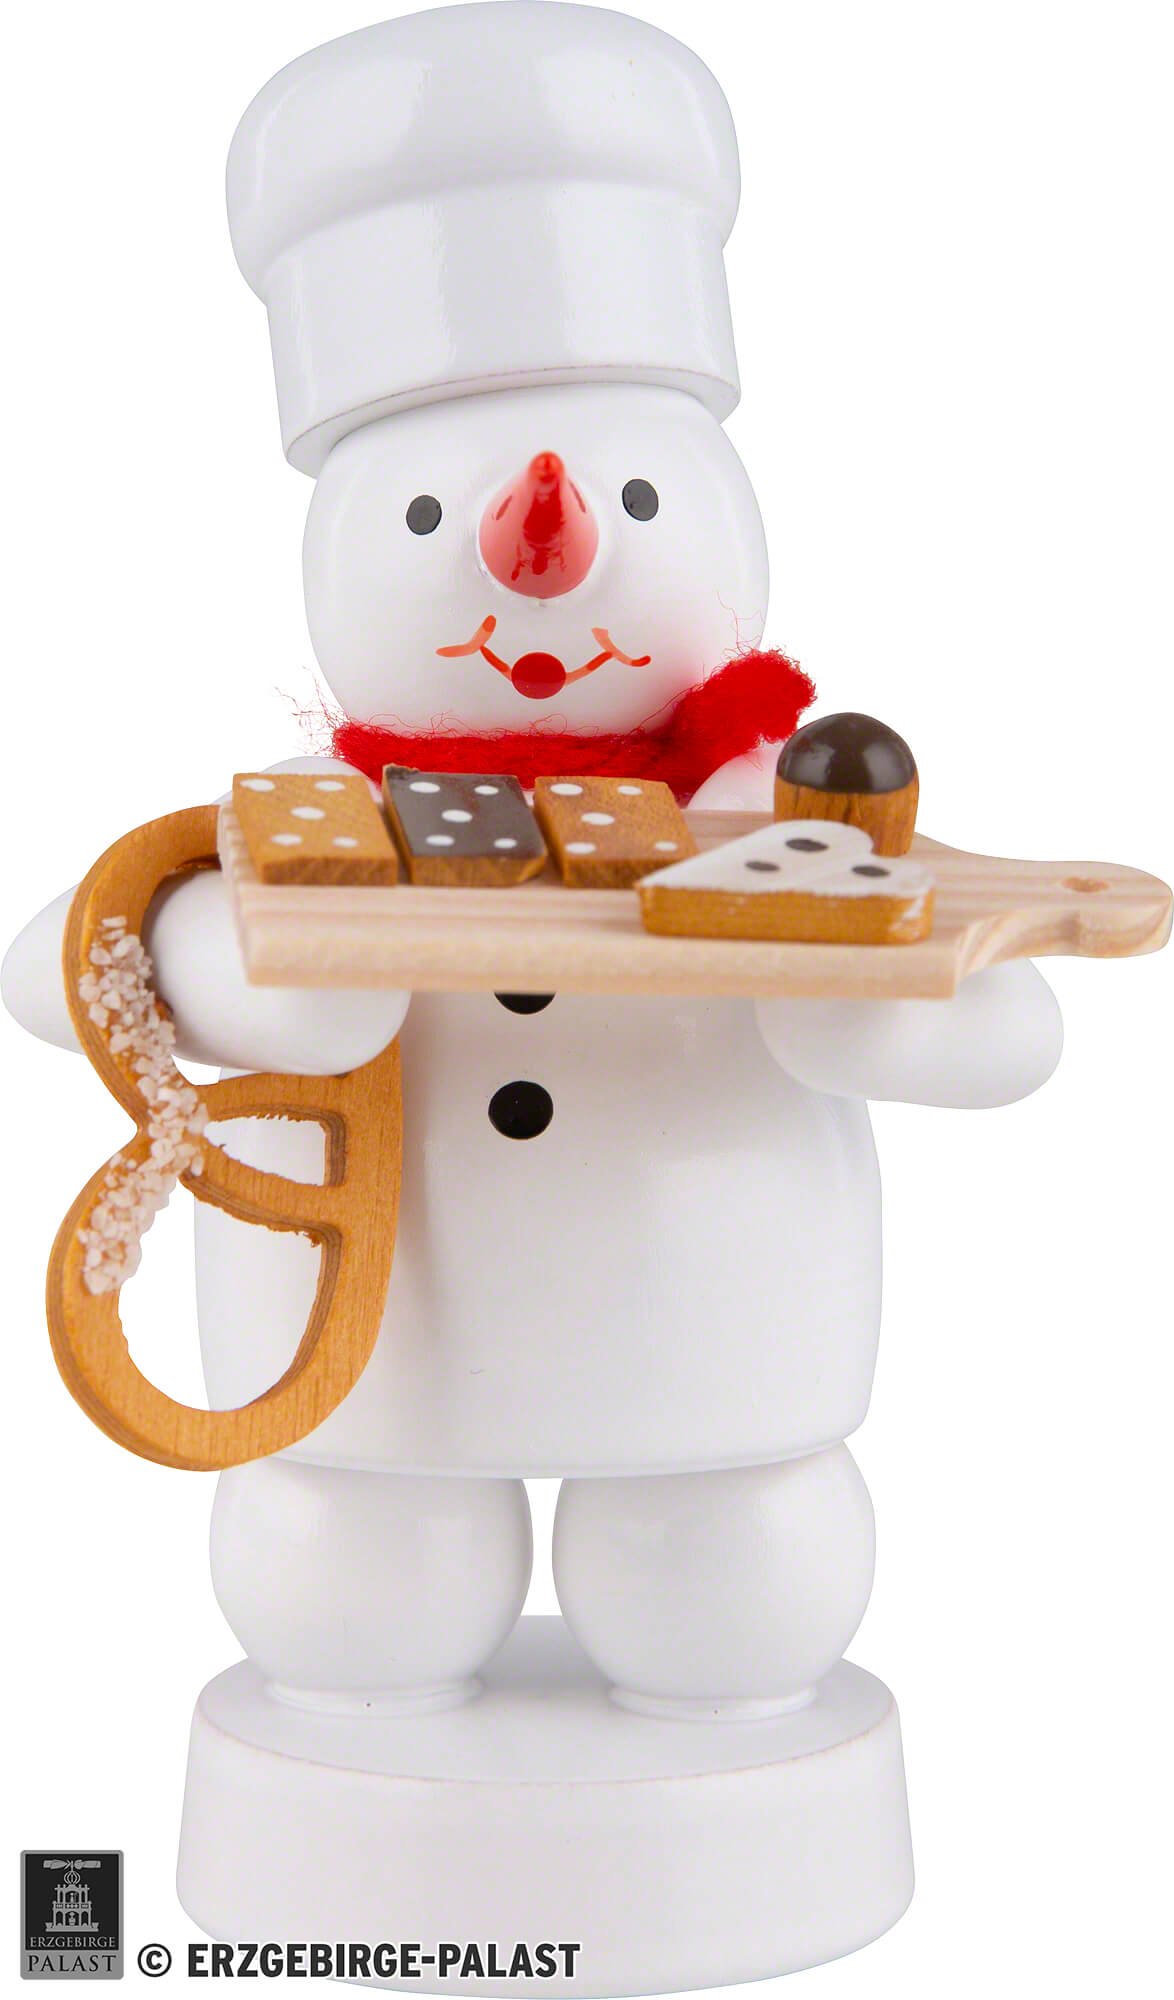 https://erz0.b-cdn.net/images/product_images/highres_images/Snowman-Baker-with-Cake-Board-and-Pretzel-8-cm-31-inch-1562941417__4260348493438_129-00-1200012_001-200-01-2_w.jpg